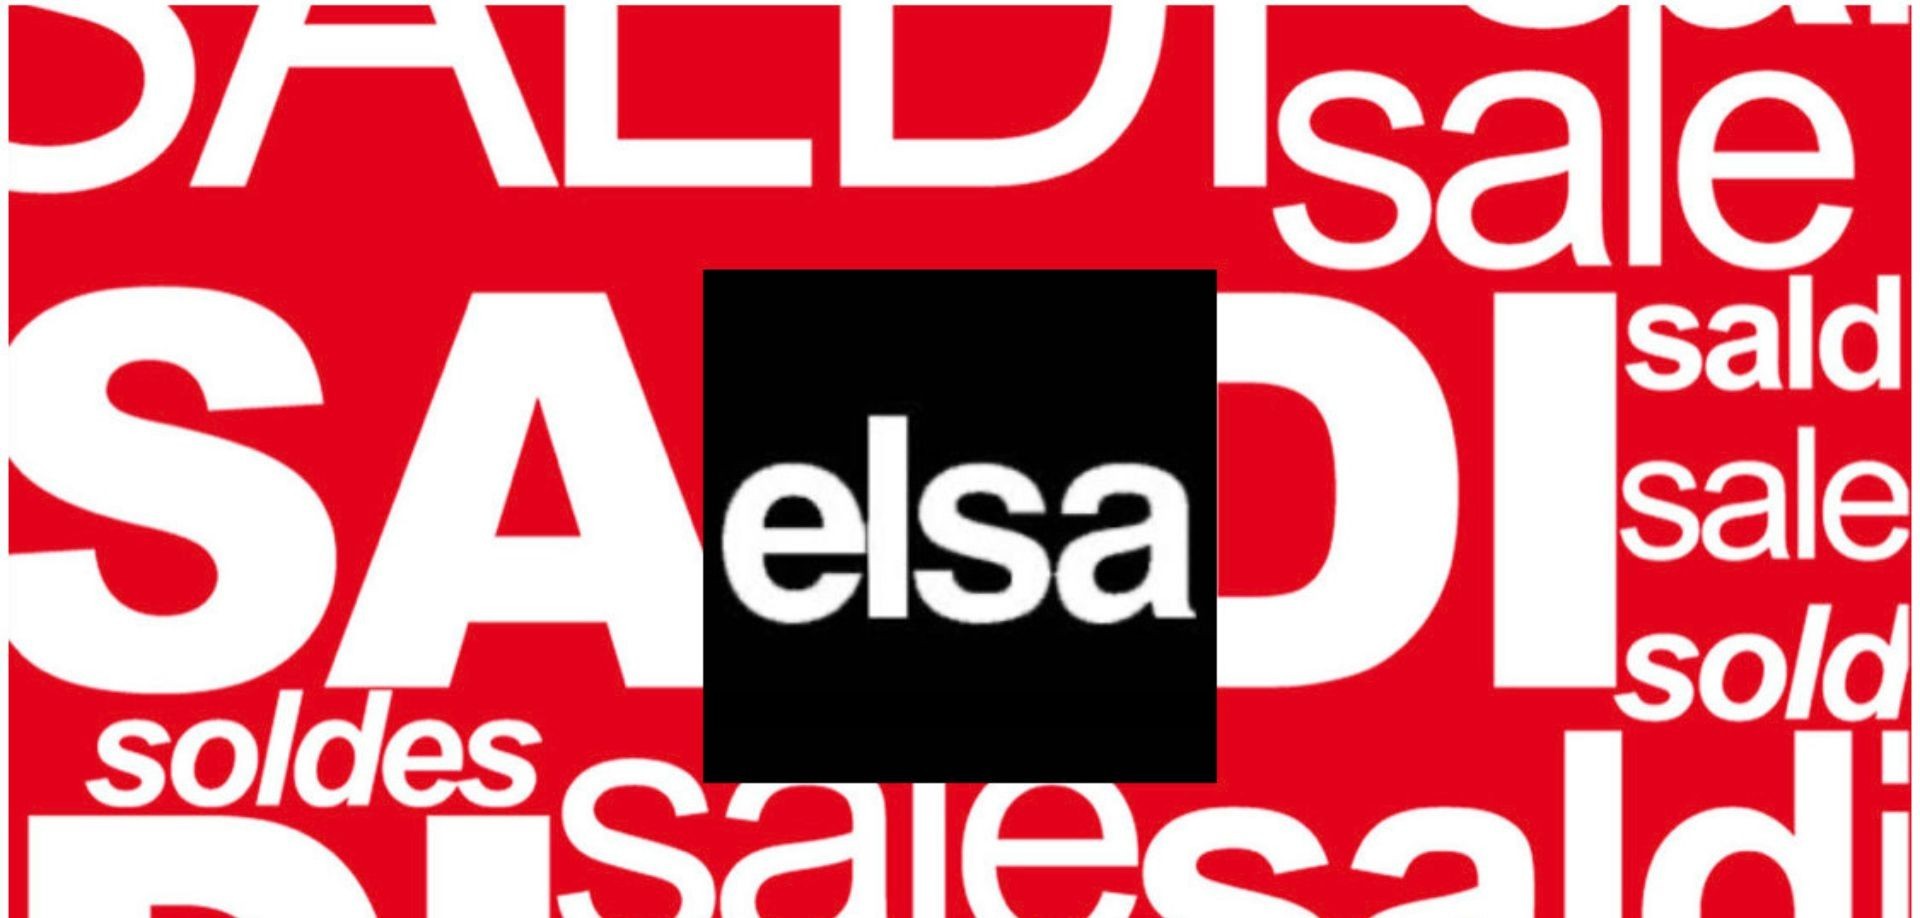 HERE THEY ARE! ELSA SALE UP TO 50%! 